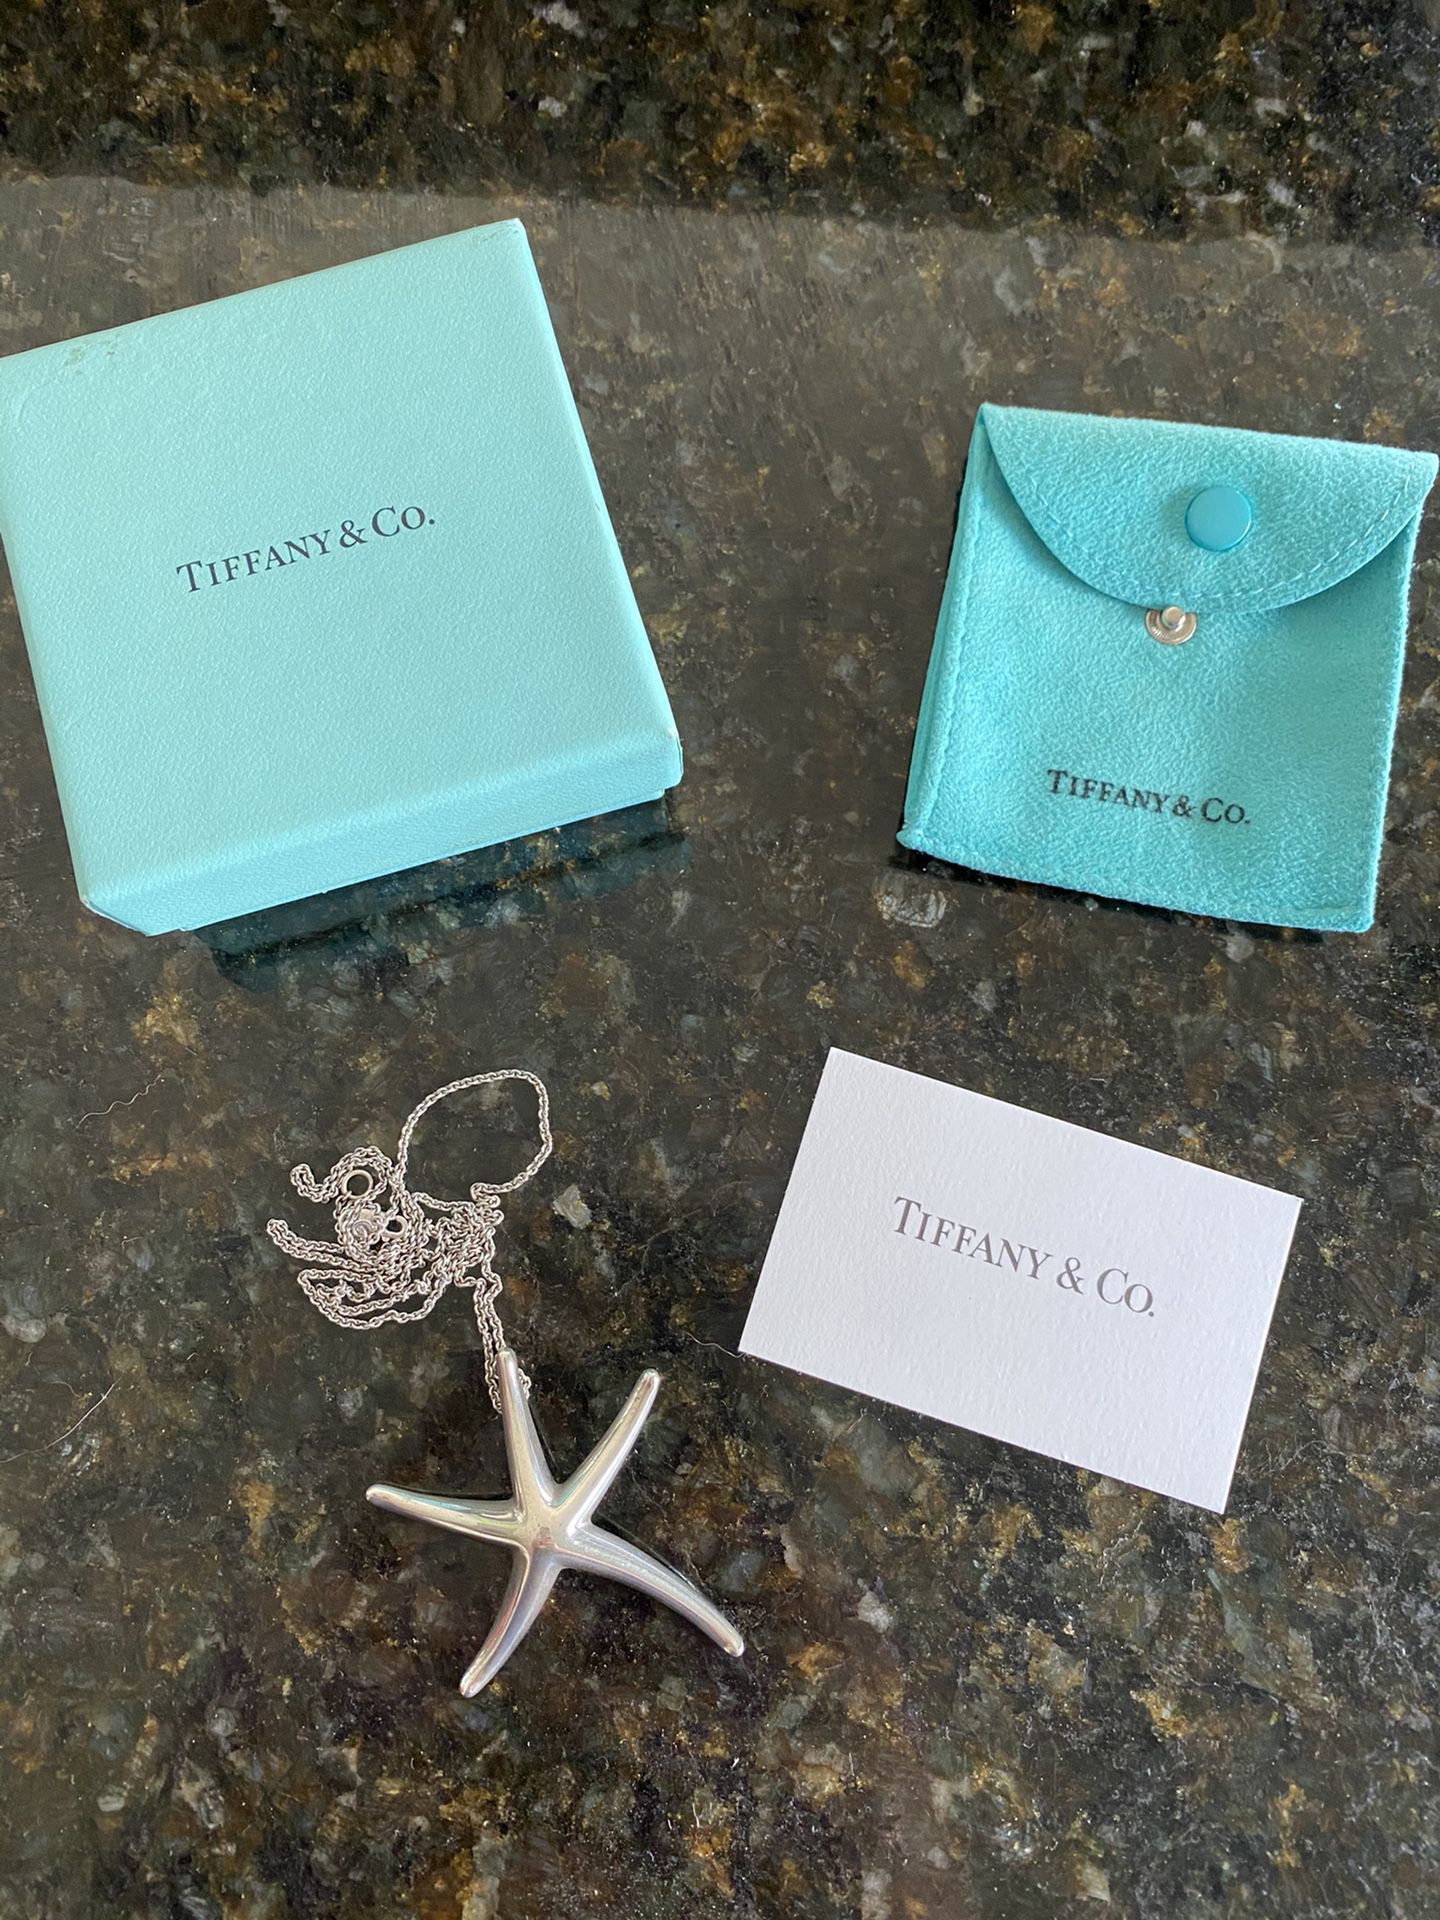 Retired Tiffany sterling silver starfish pendant necklace